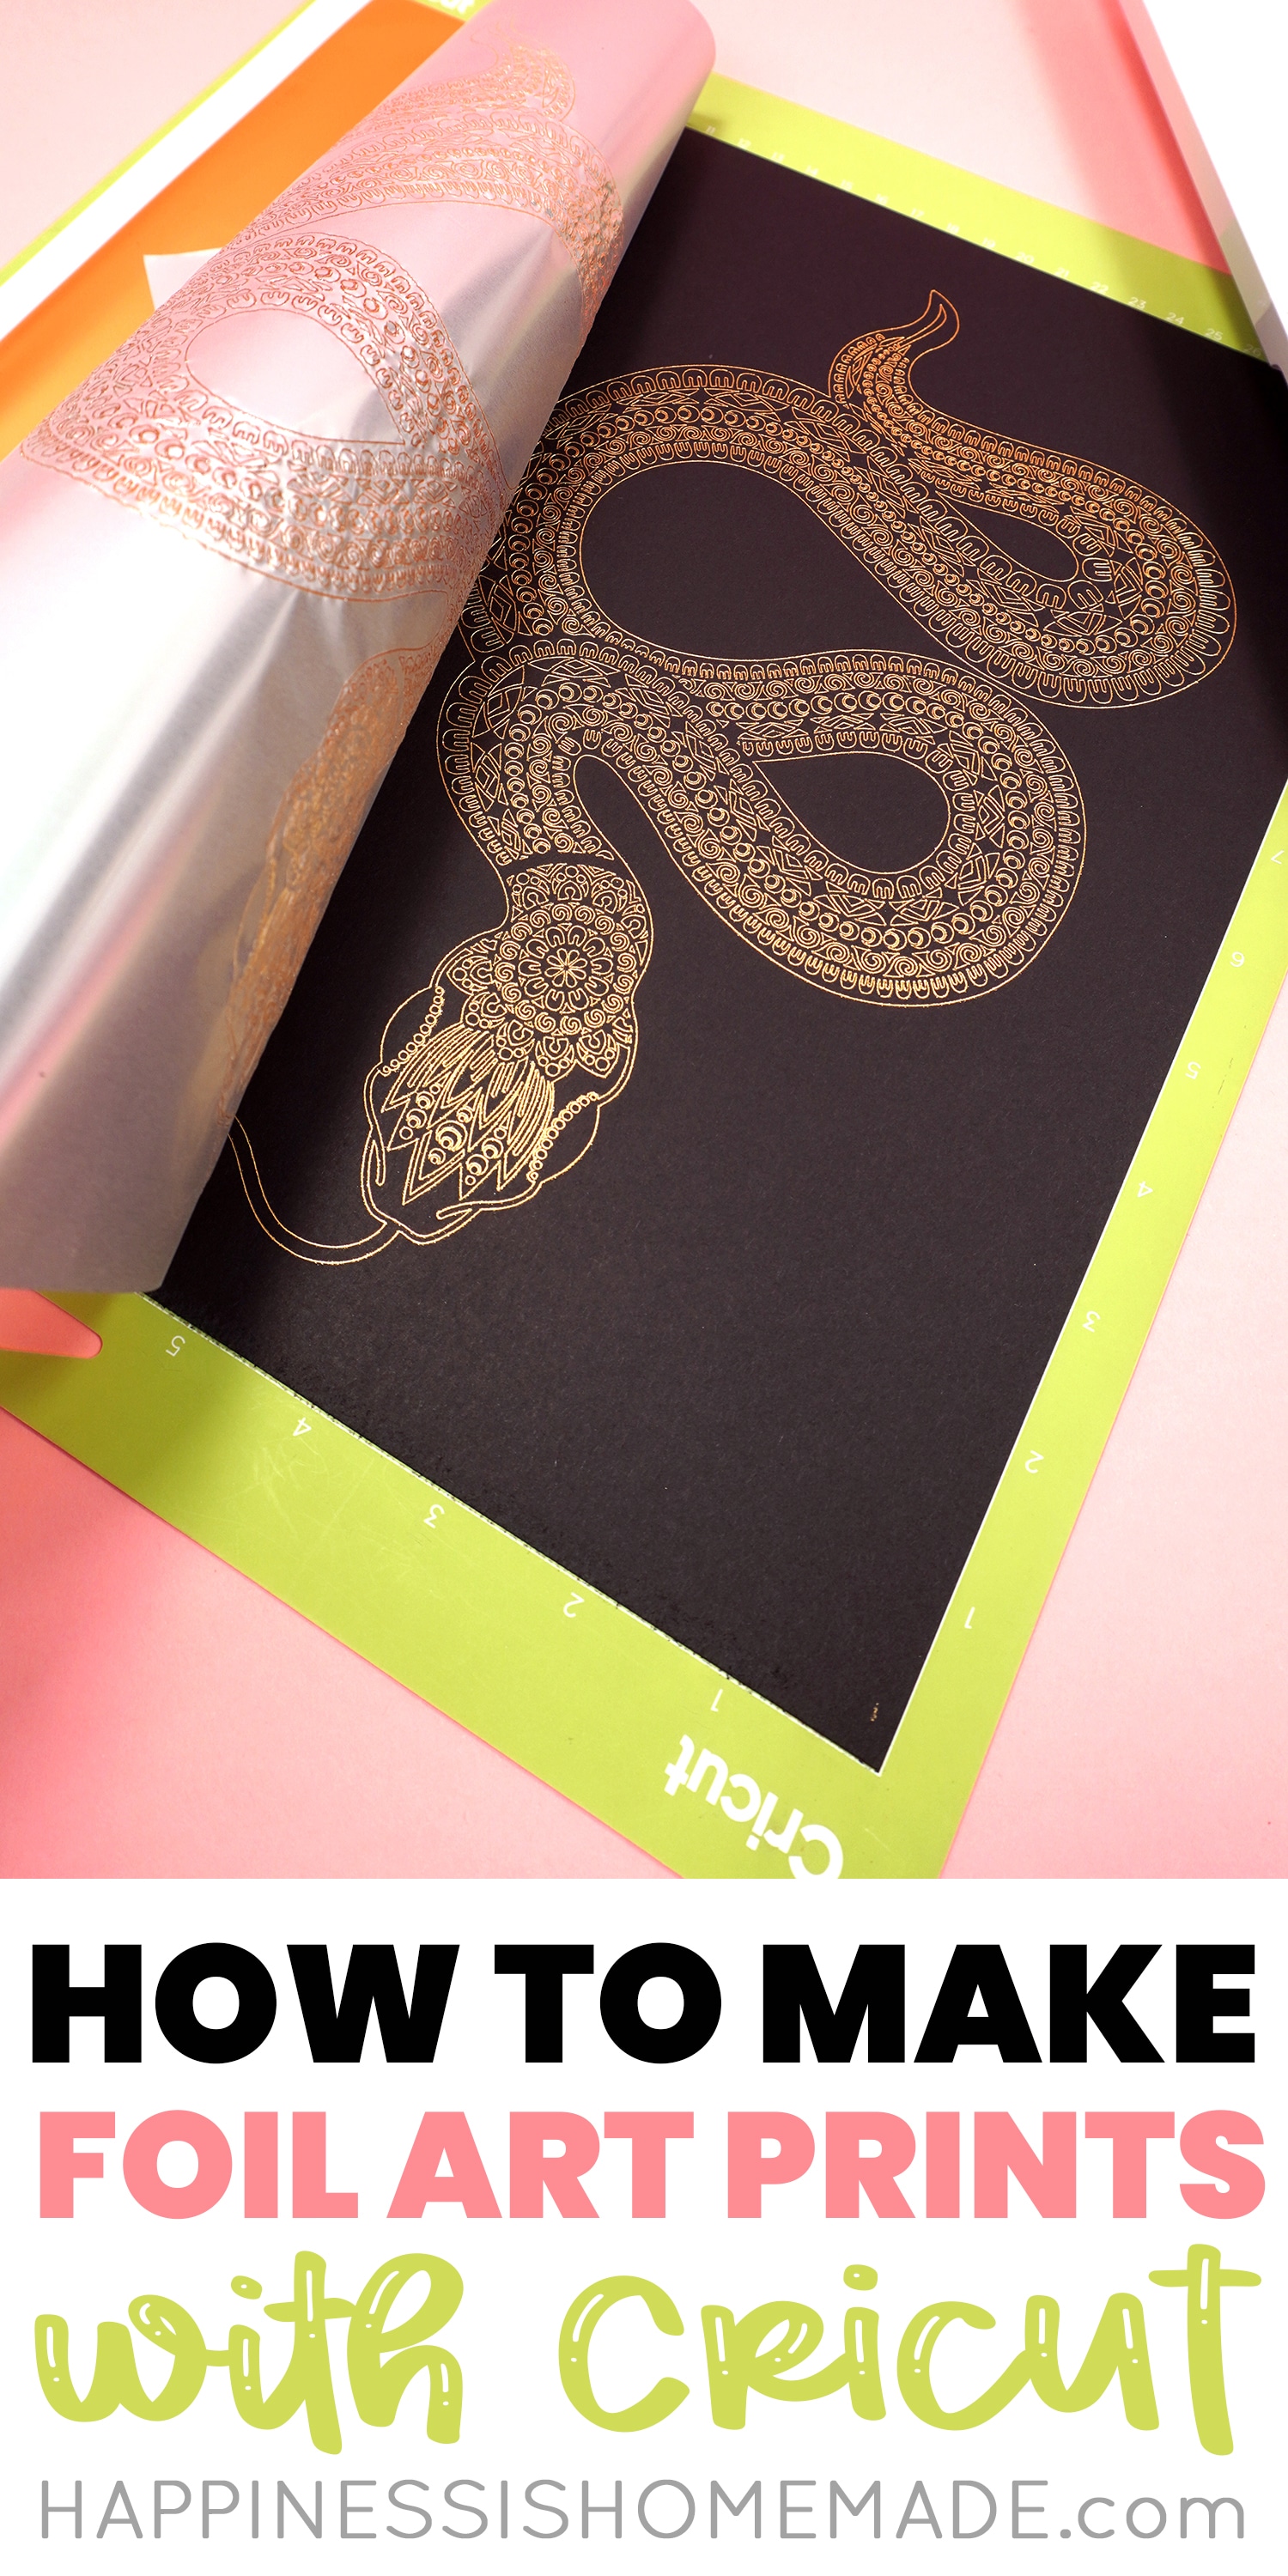 DIY Foil Art Prints with the Cricut Foil Transfer System - Happiness is